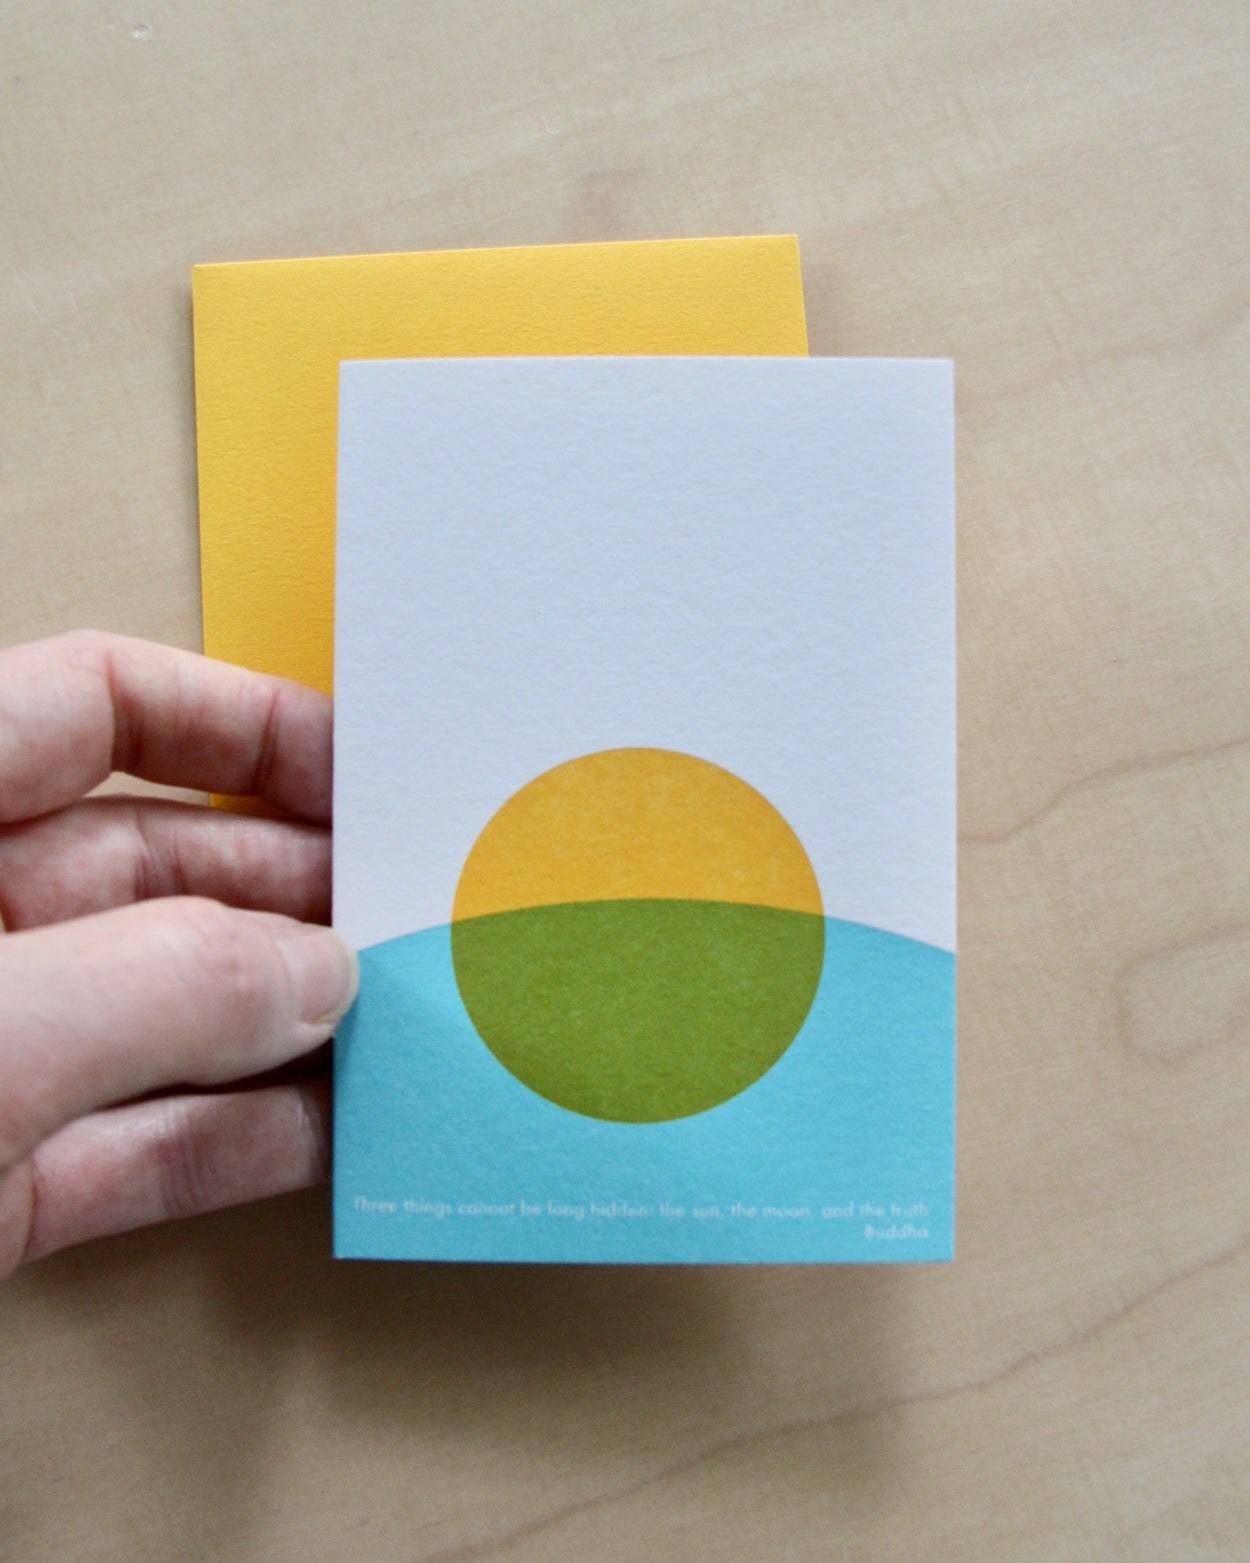 Hand holding a Hand printed greeting card with yellow sun and blue curve on a yellow envelope. reading "Three things cannot be long hidden, the sun, the moon and the truth" Buddha